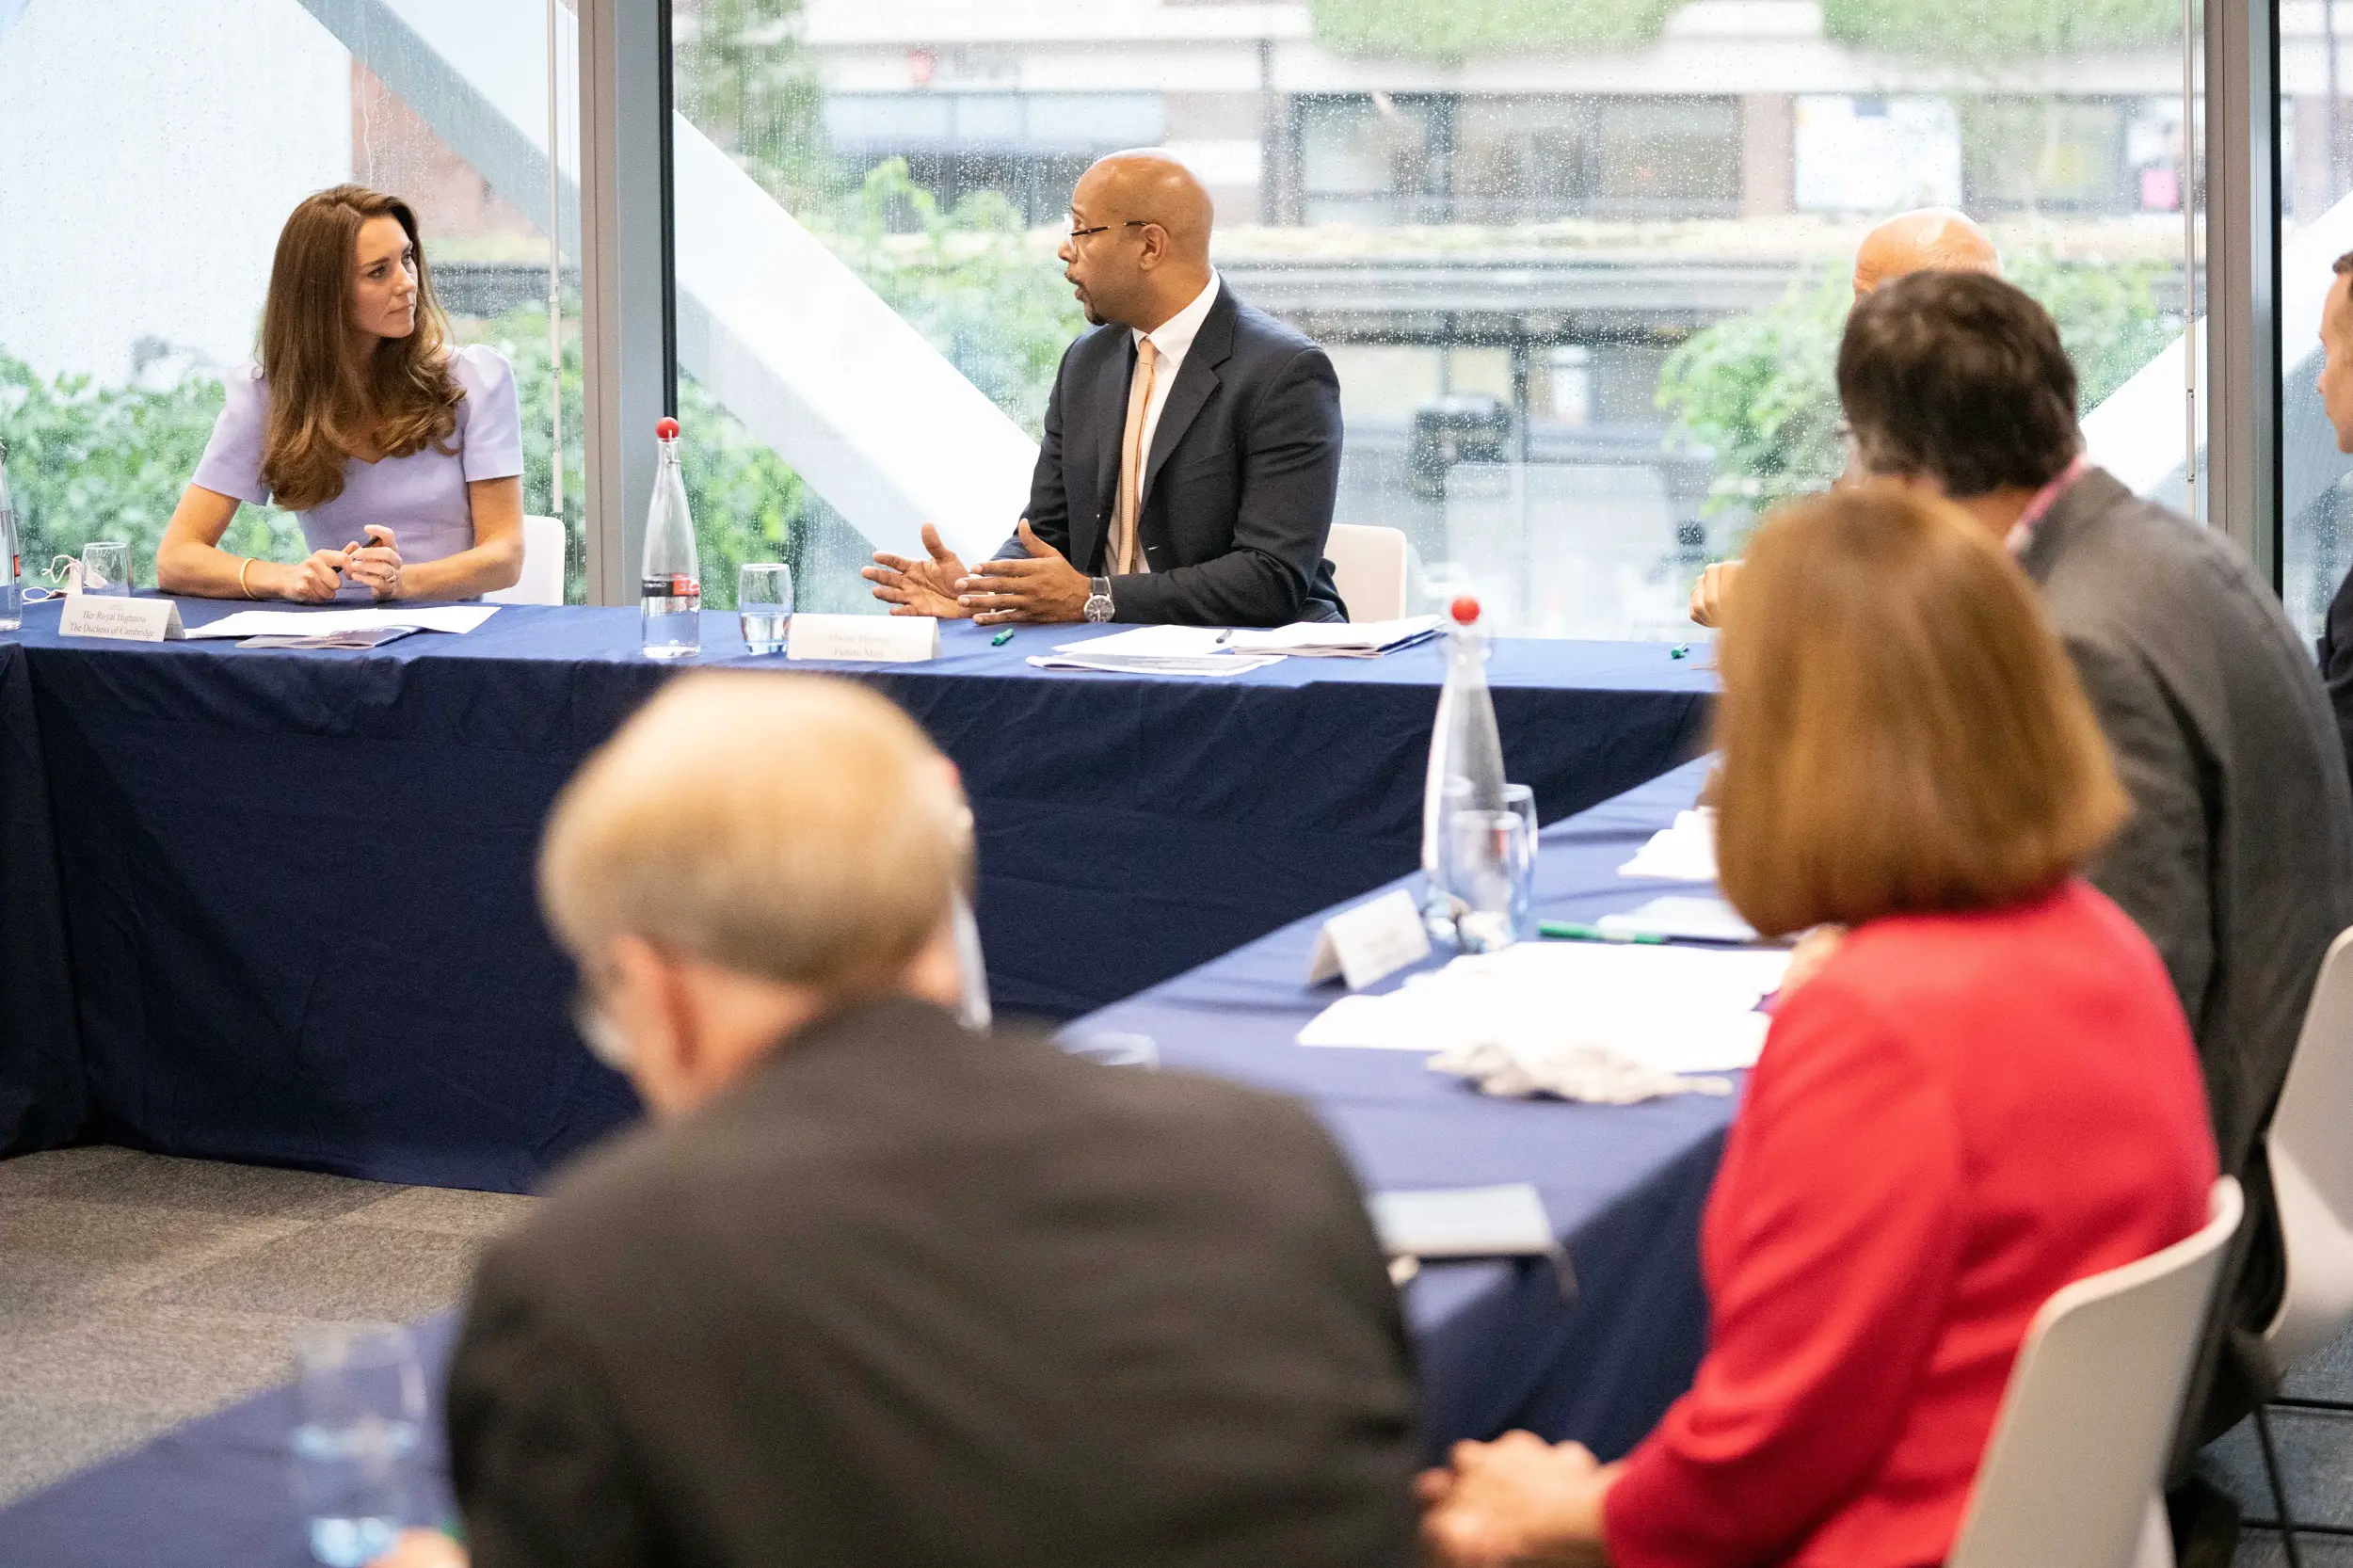 The Duchess of Cambridge attended a roundtable discussion at the London School of Economics